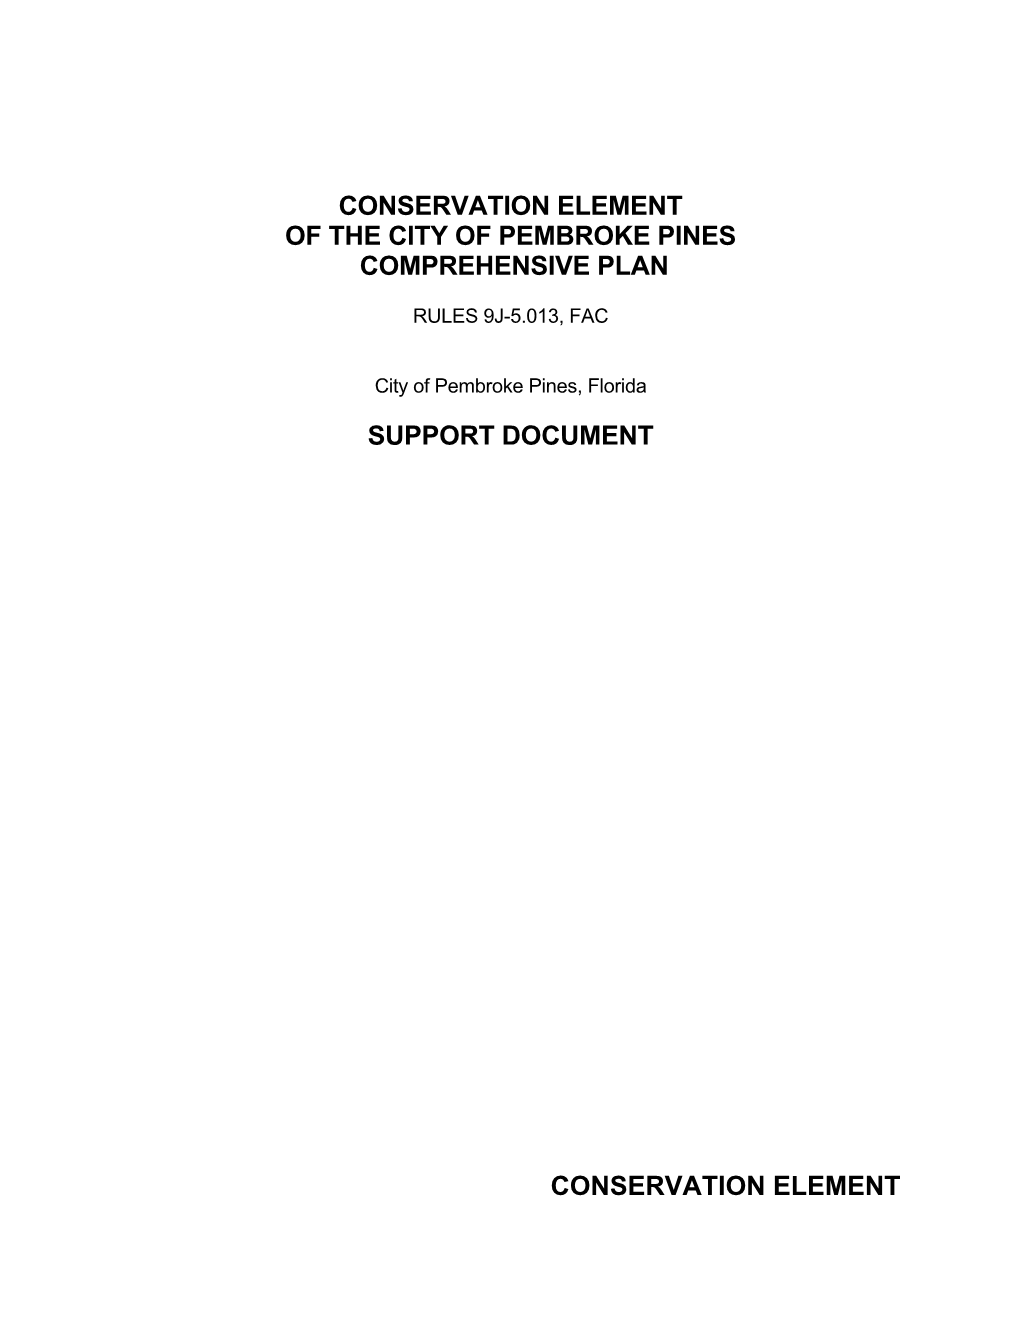 Support Document